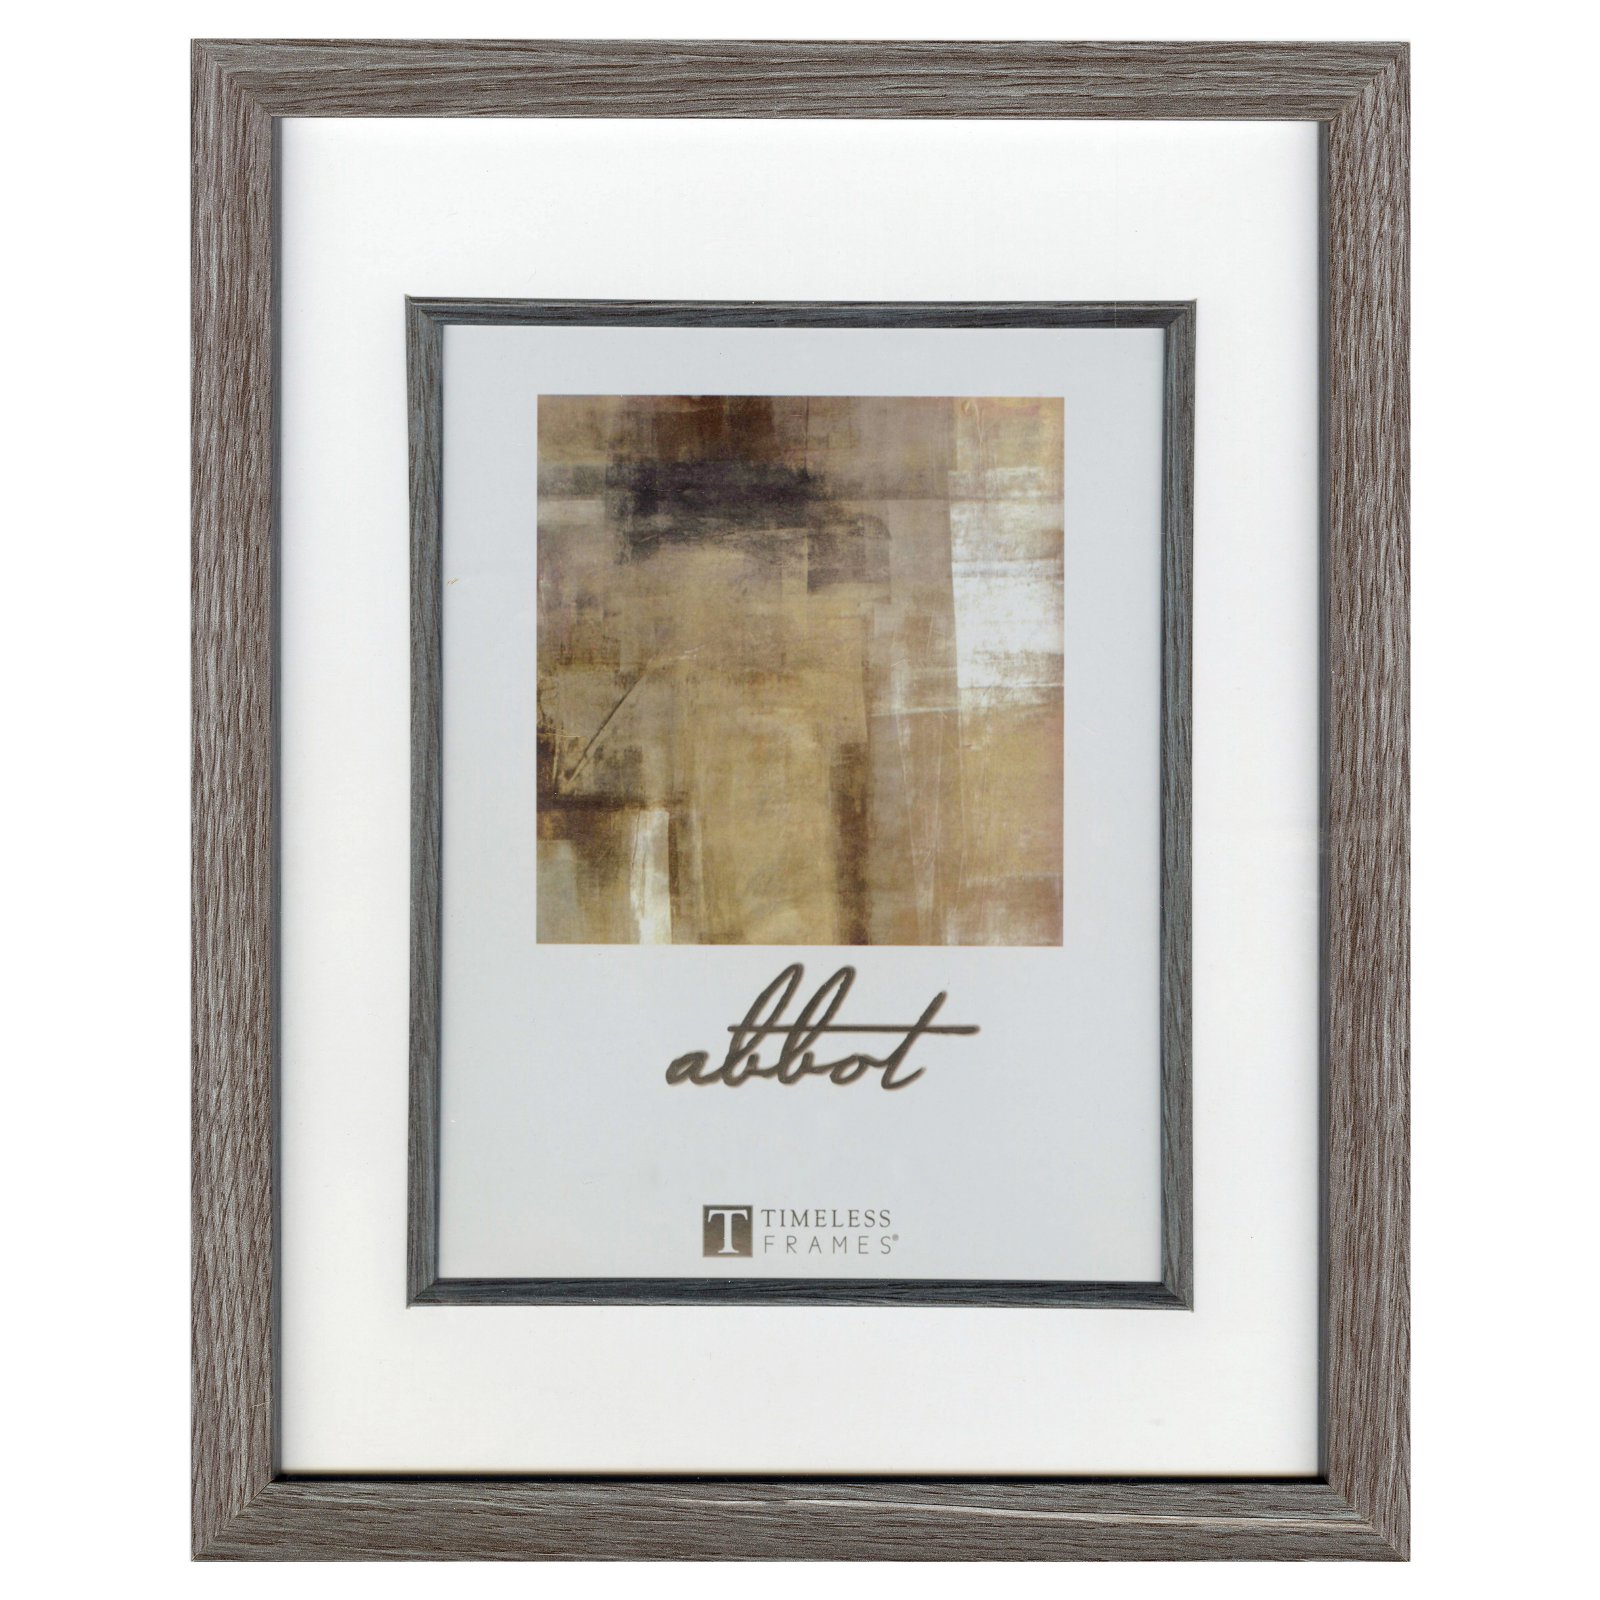 Timeless Decor Abbot Gray Picture Frame, 5 x 5 to 8 x 8 Inches - image 1 of 2